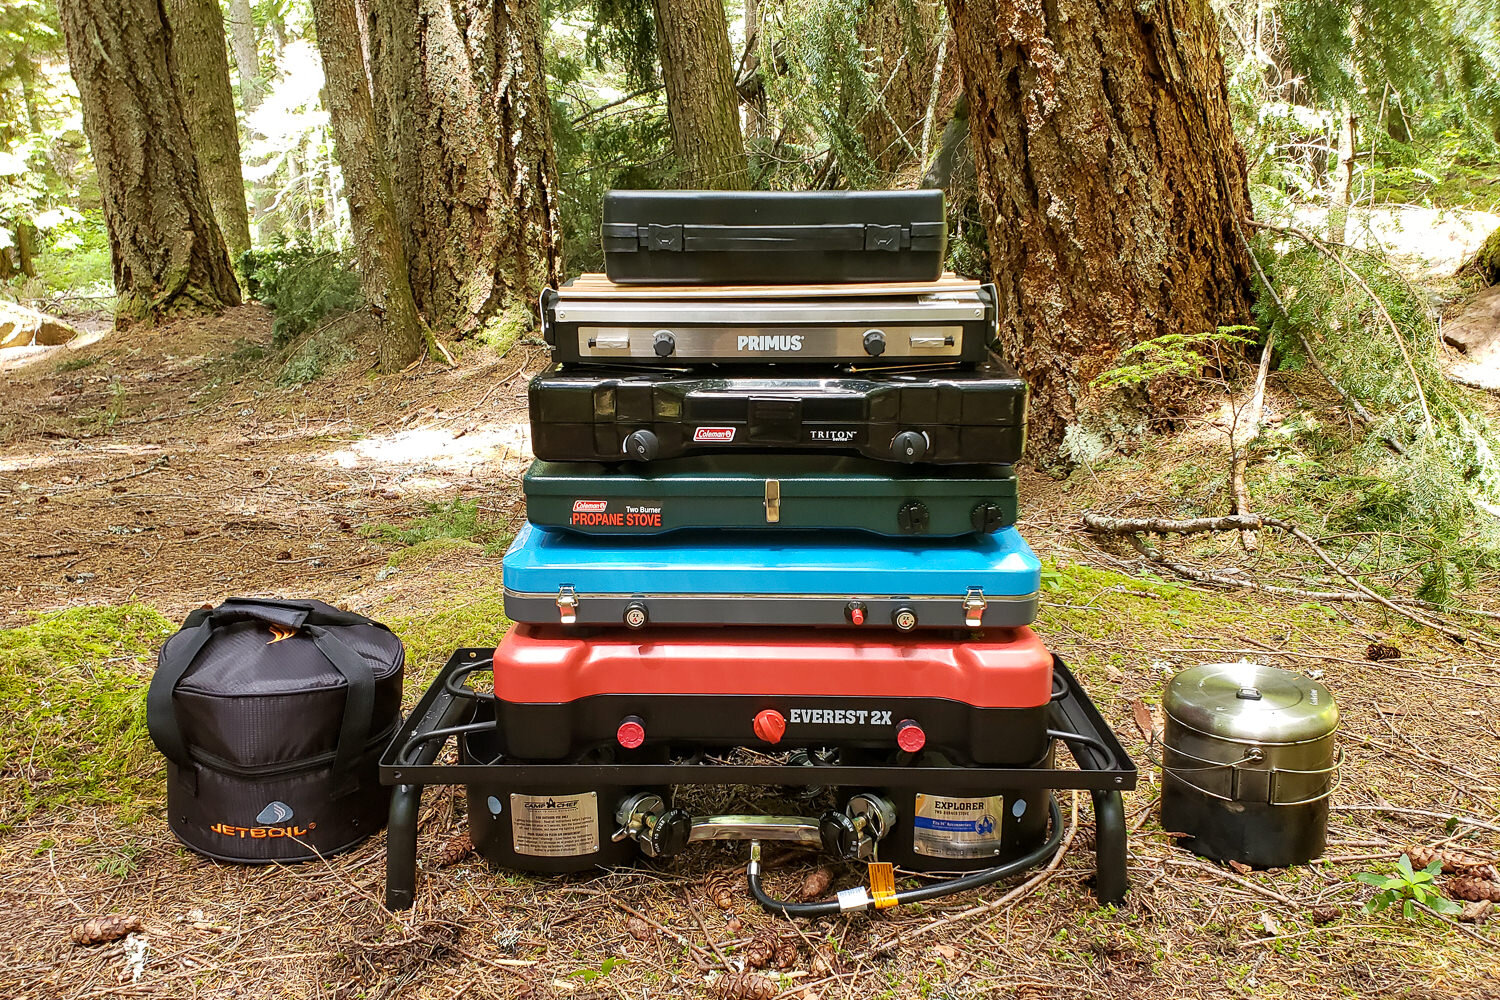 https://www.cleverhiker.com/wp-content/uploads/2023/08/Comparing-the-sizes-and-shapes-of-camping-stoves-in-packed-position.jpeg